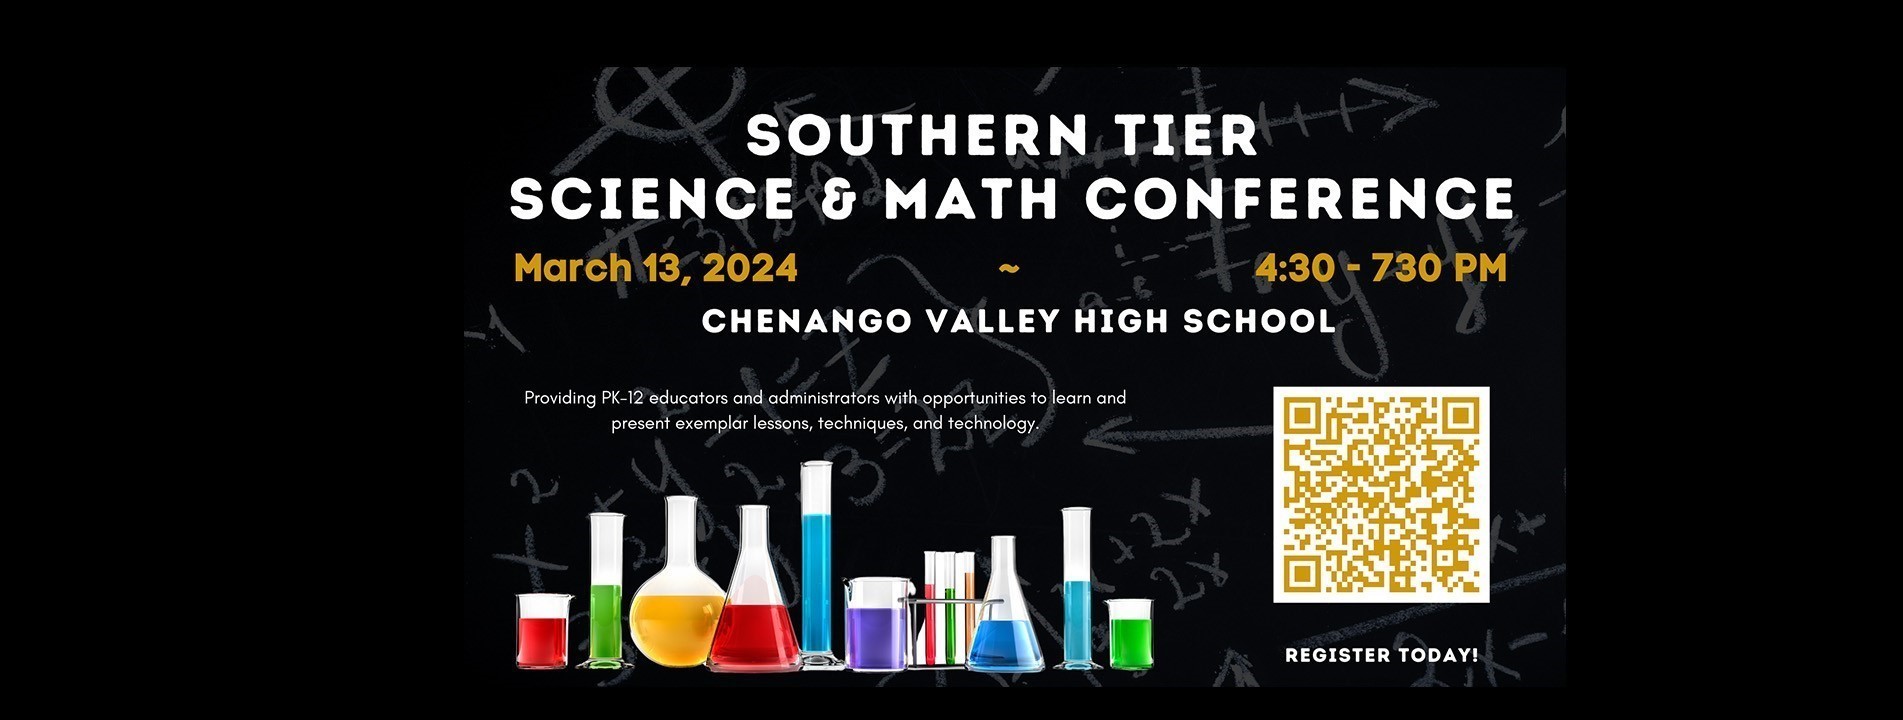 Southern Tier Science and Math Conference. March 13, 2024. 4:30 - 7:30 pm. Chenango Valley High School. Providing PK-12 educators and administrators with opportunities to learn and present exemplar lessons, techniques, and technology.